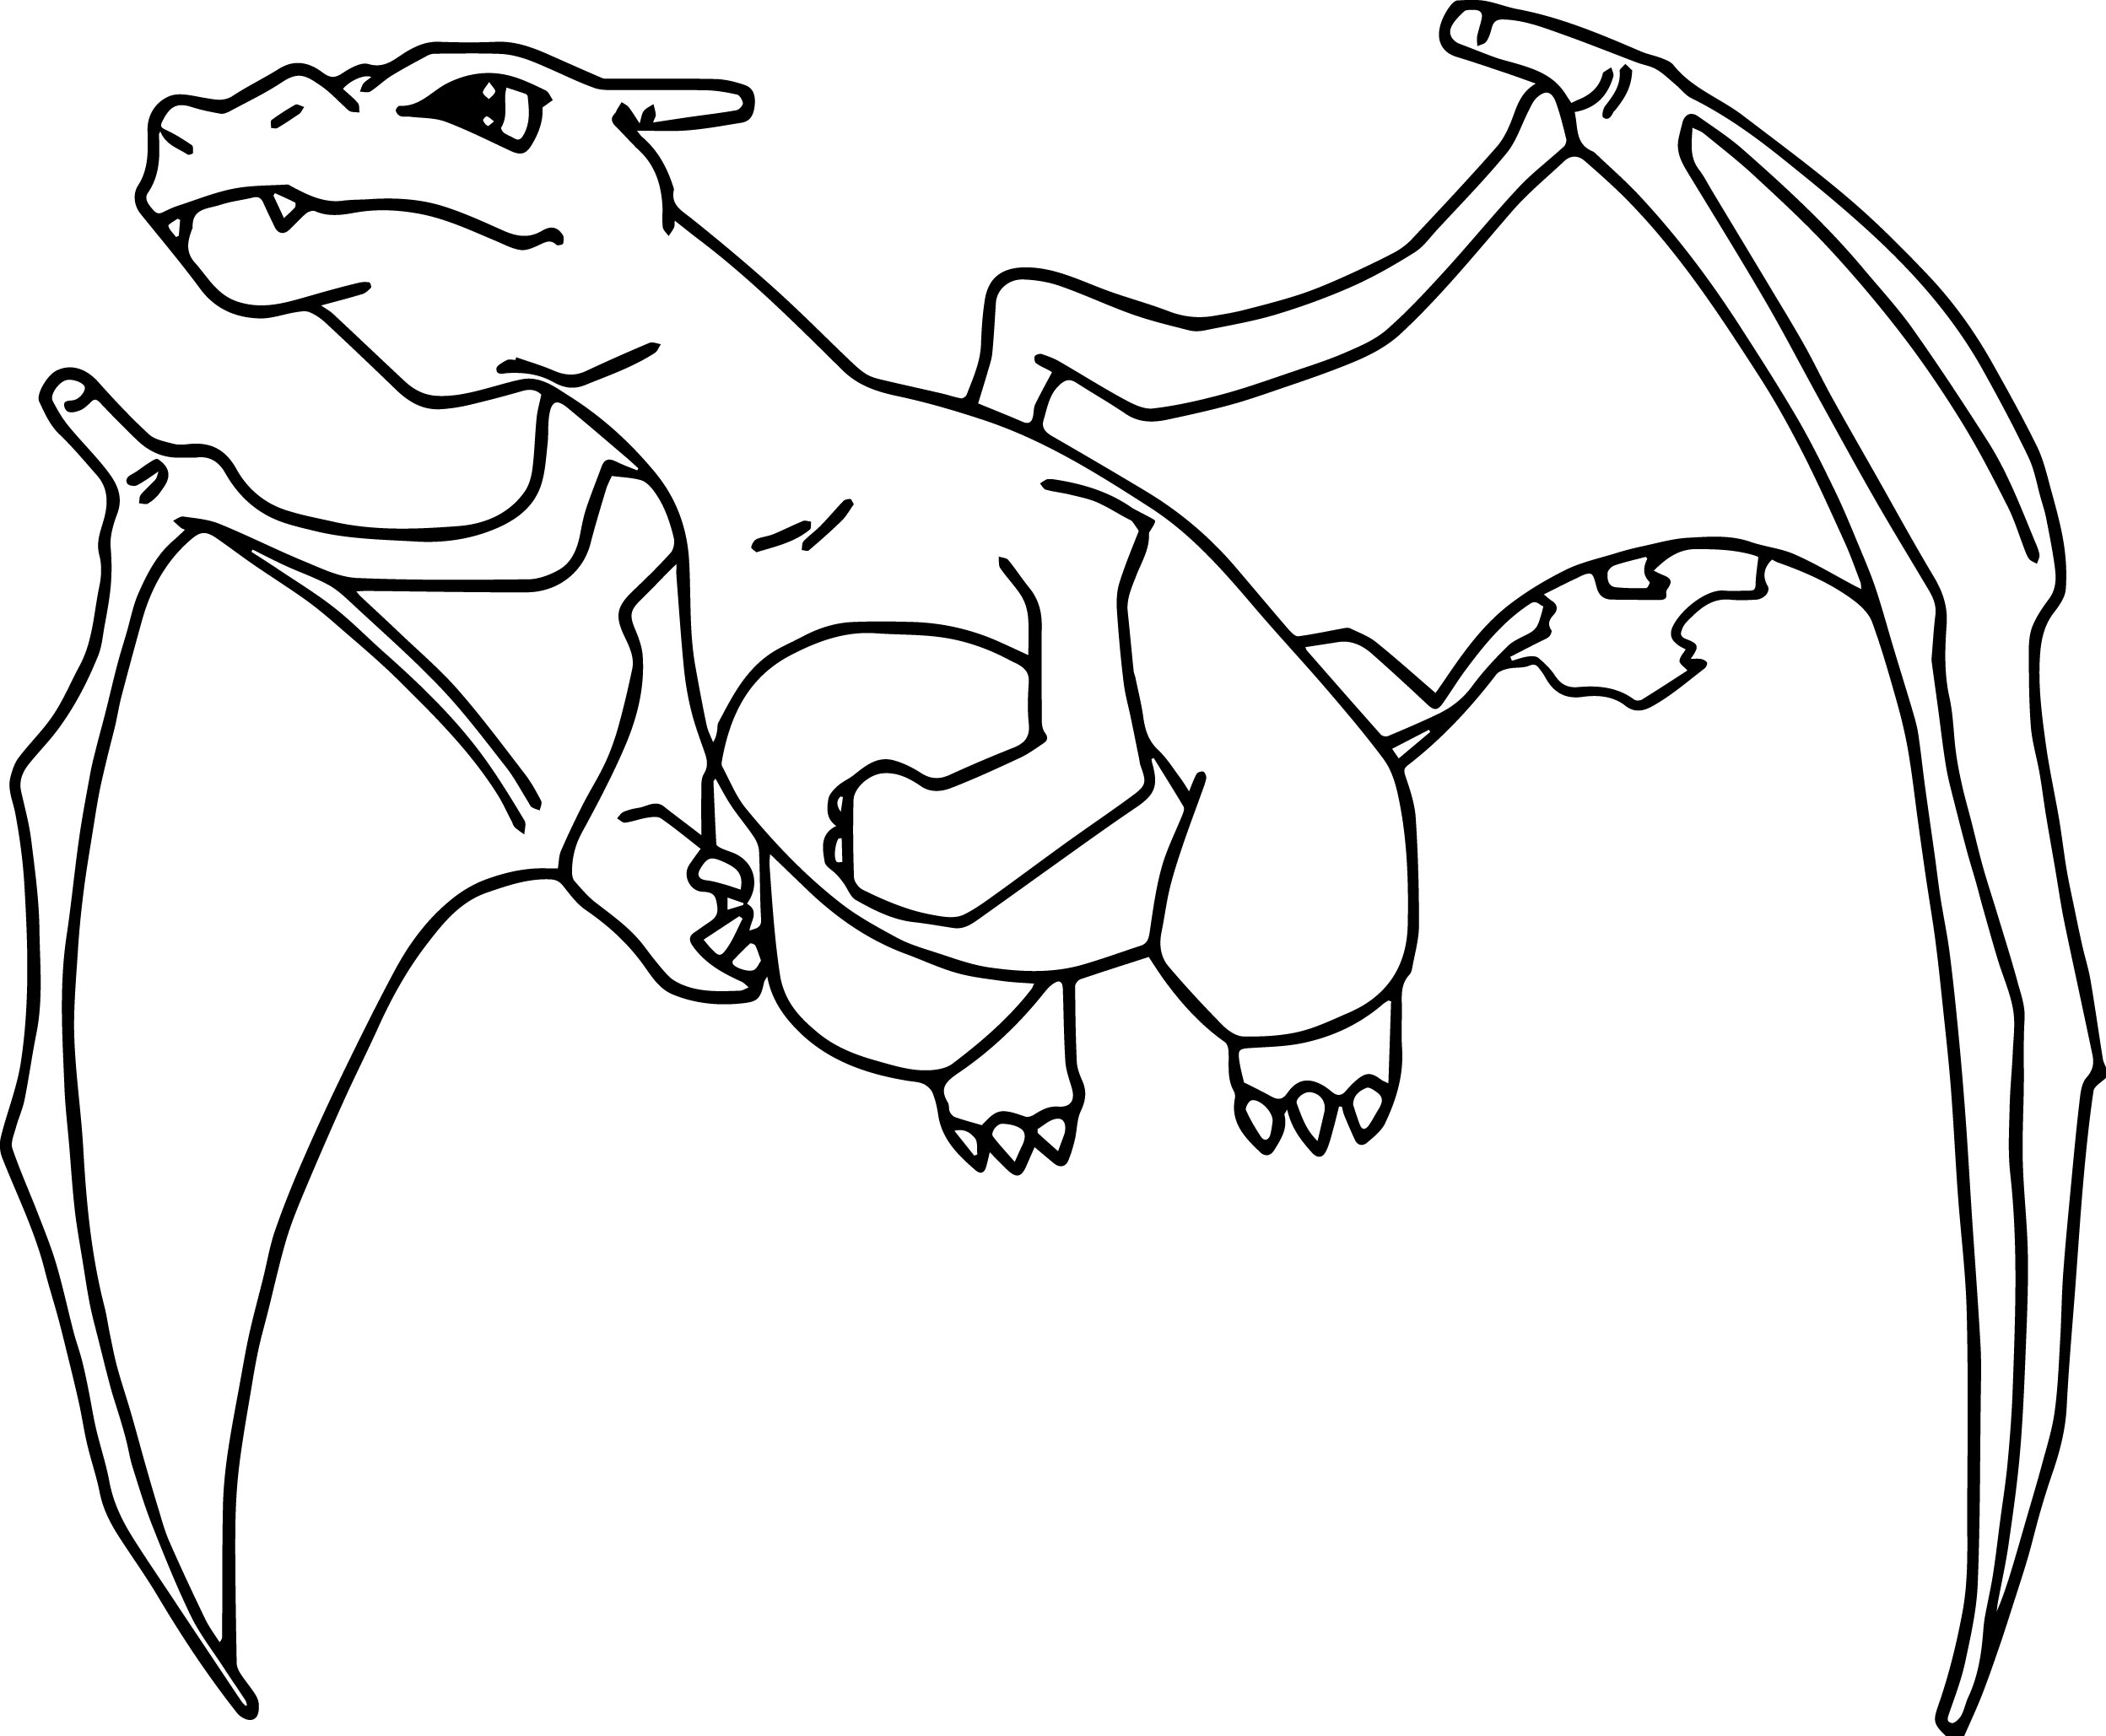 Best Of Pokemon Coloring Pages Charizard Gallery Printable. 